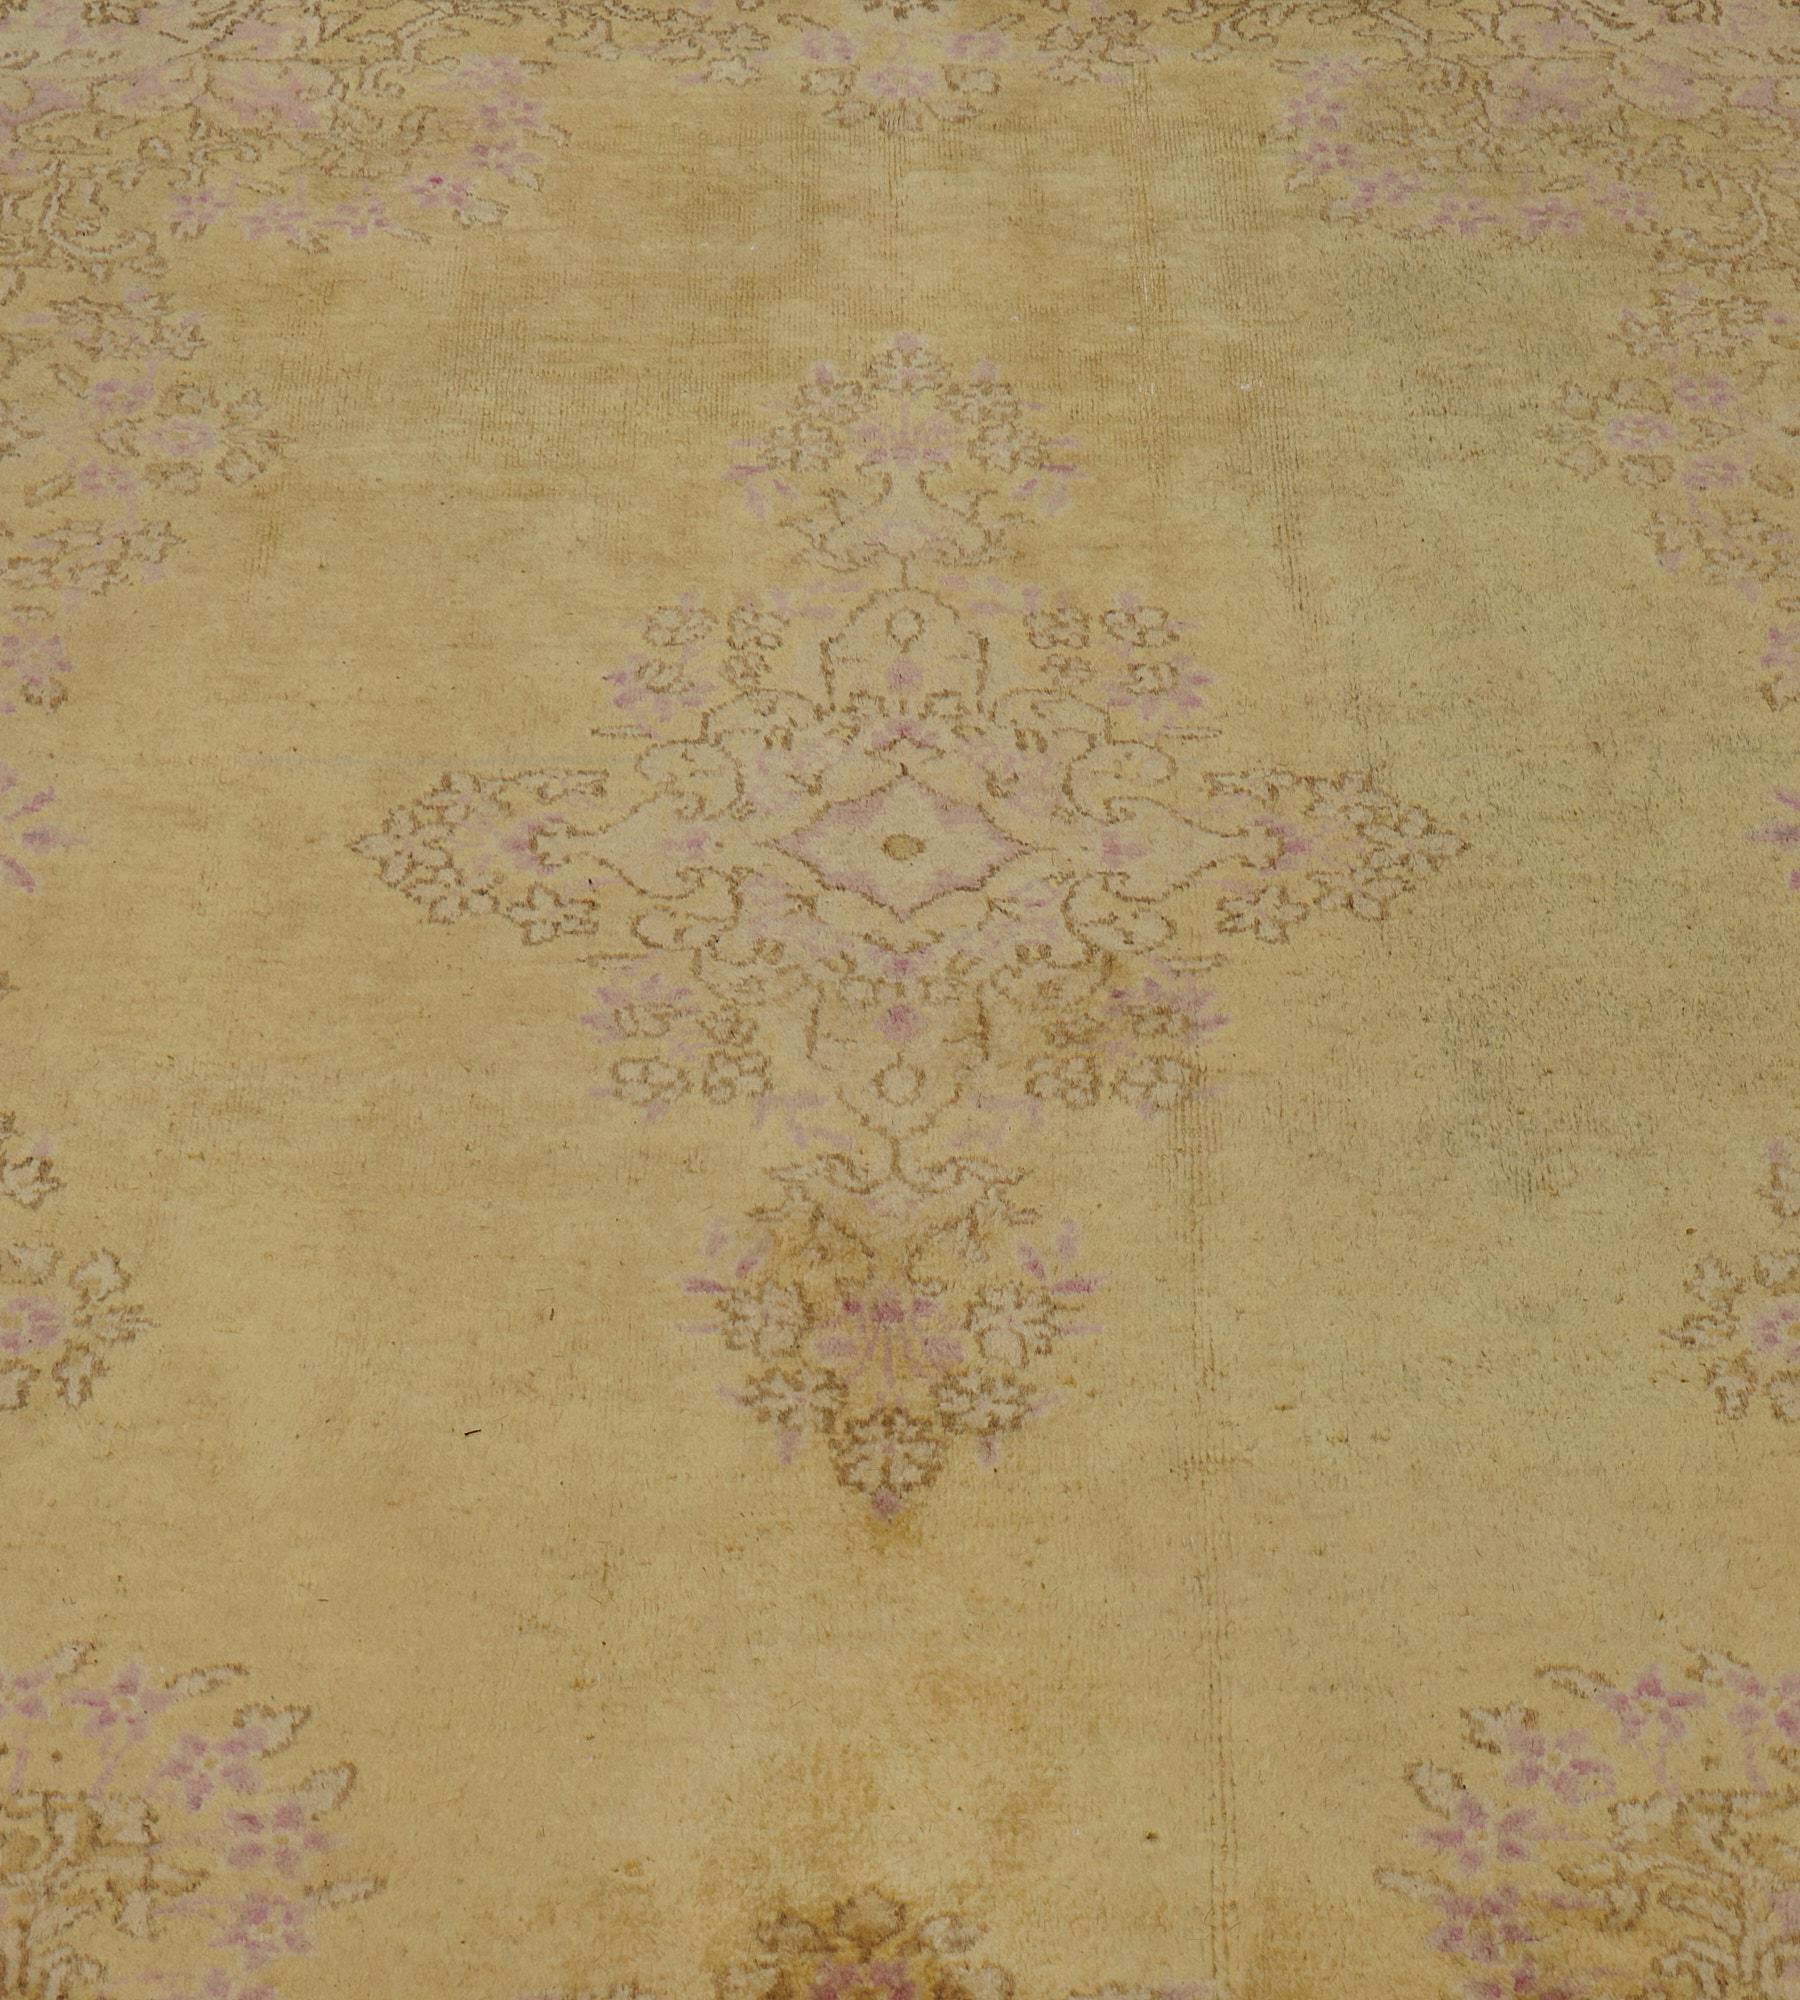 This antique, circa-1920, Kerman rug has a pistachio-yellow field with a central delicate floral lozenge with floral pendants, scrolling shaded pink and olive-green spandrels in each corner, in a broad similar scrolling floral border within a